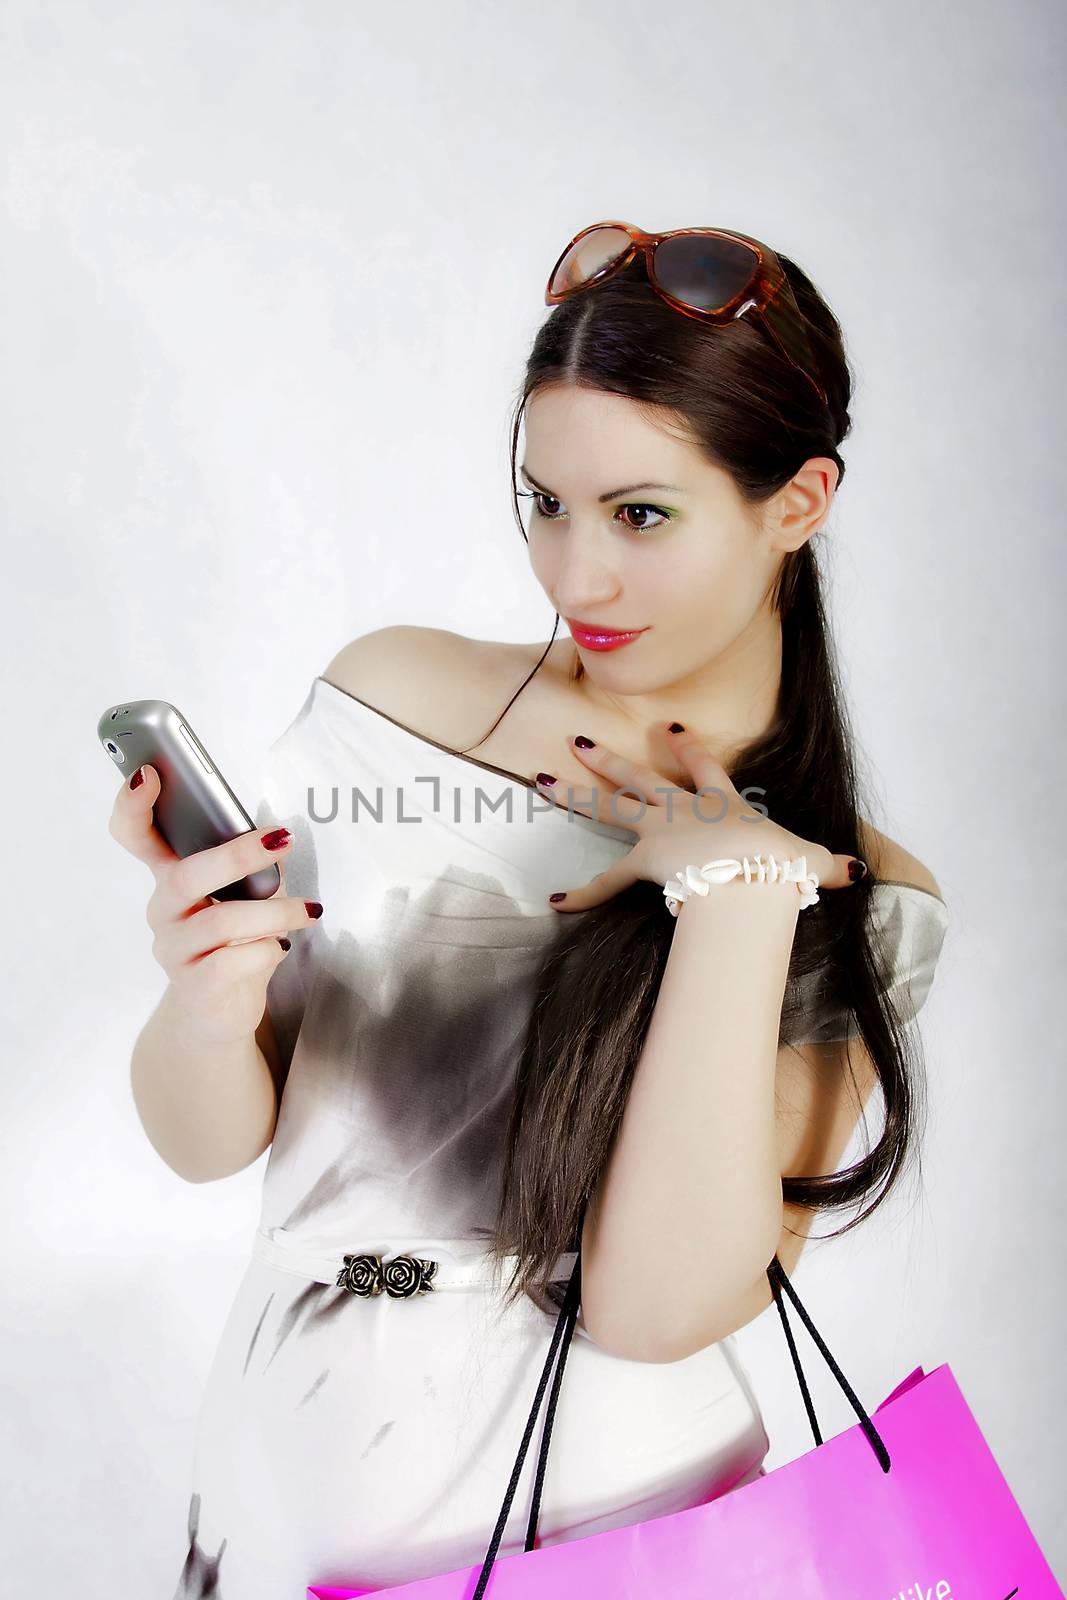 Attractive fashion model looking at her cell phone by dukibu